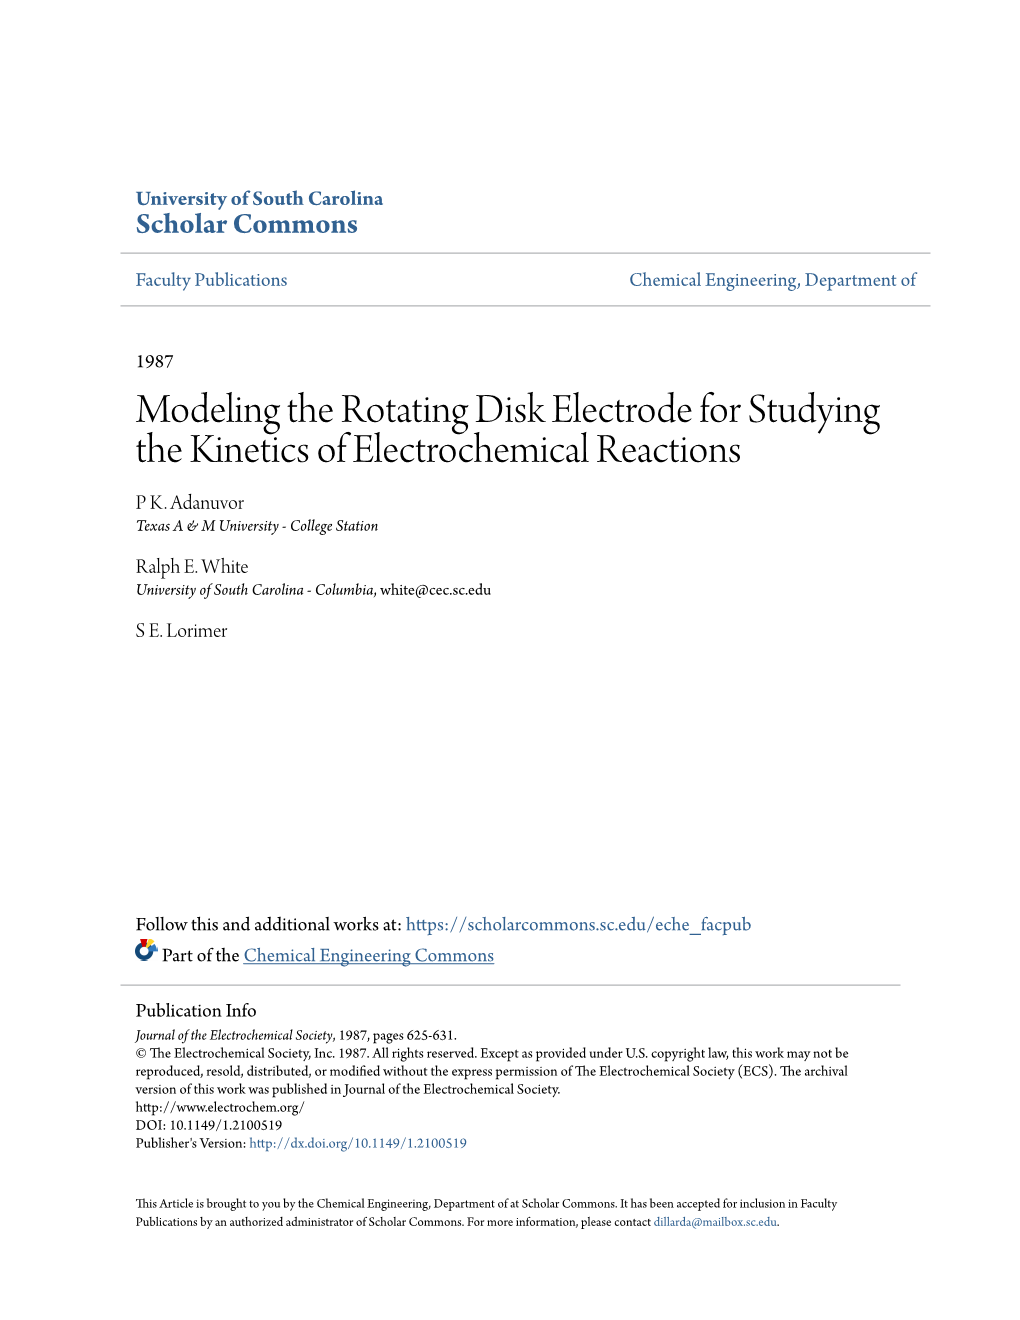 Modeling the Rotating Disk Electrode for Studying the Kinetics of Electrochemical Reactions P K